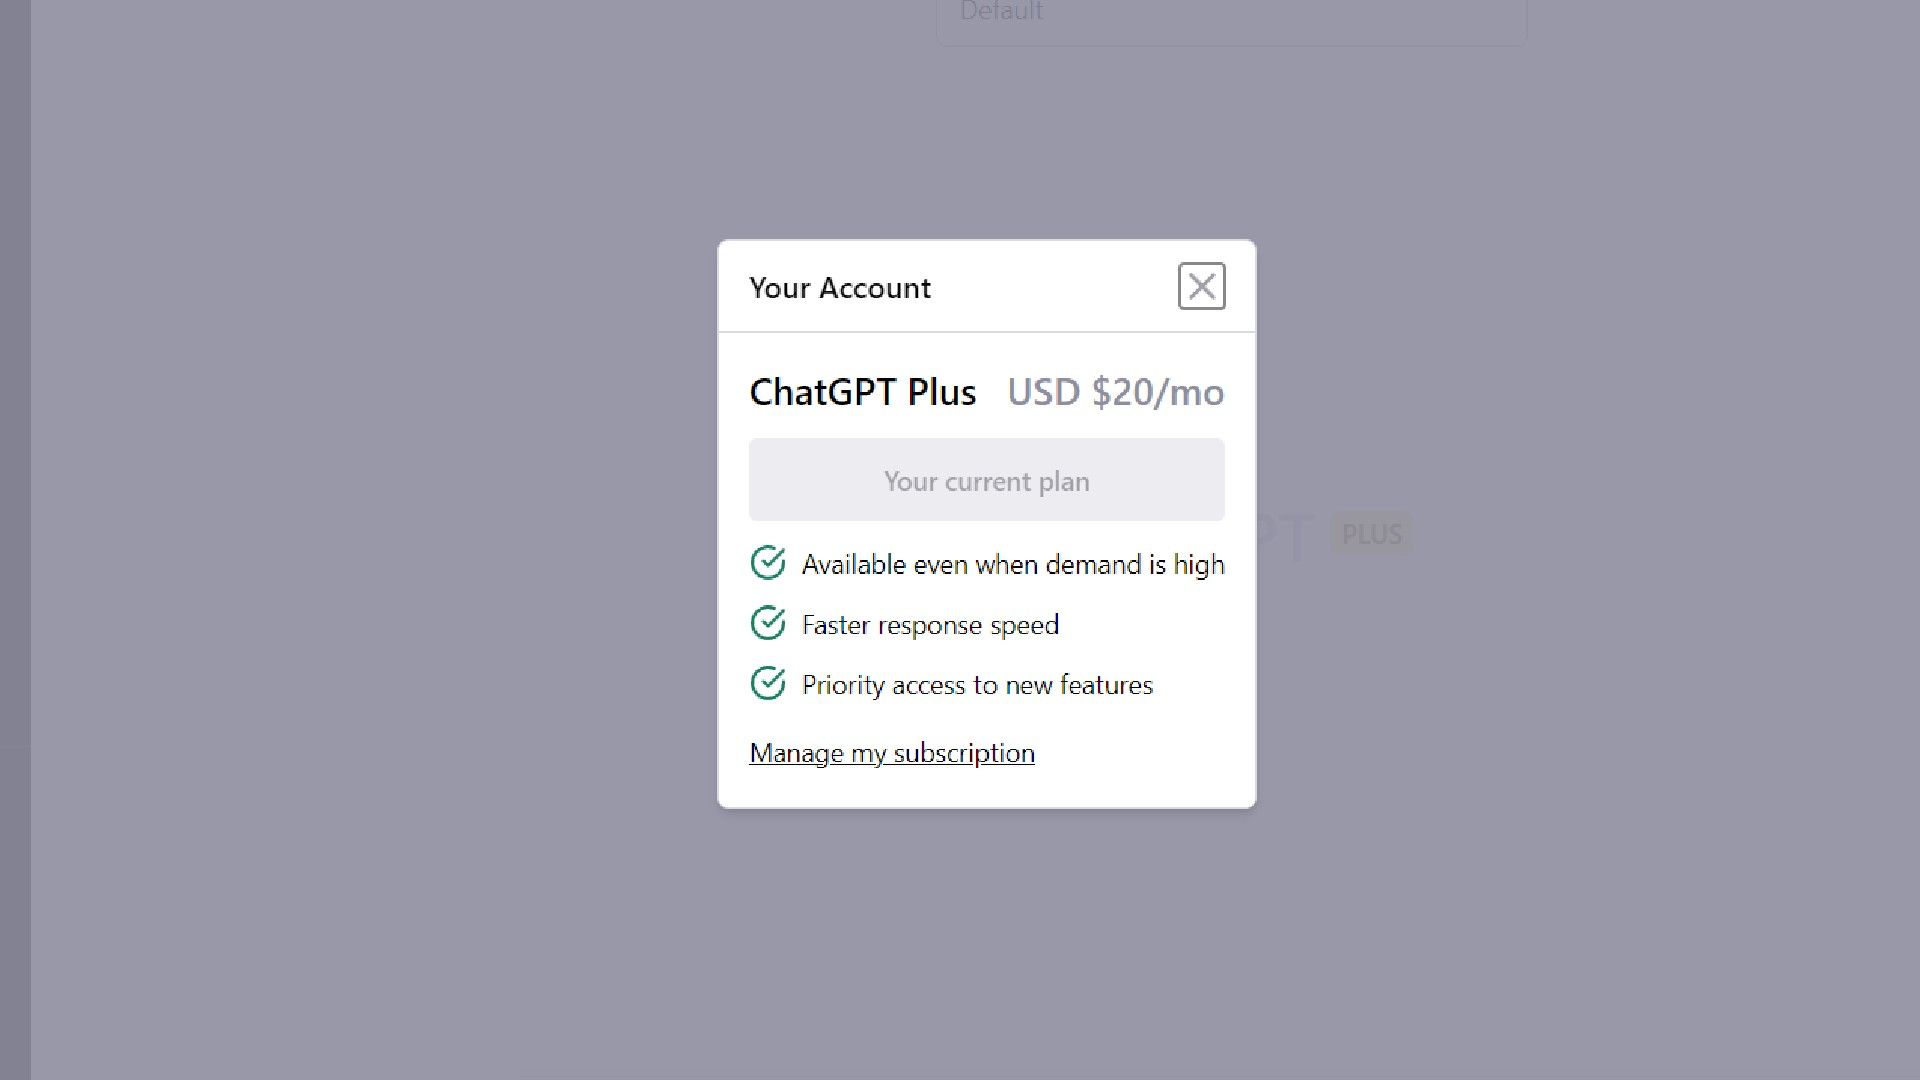 A screenshot of the ChatGPT Plus subscription screen